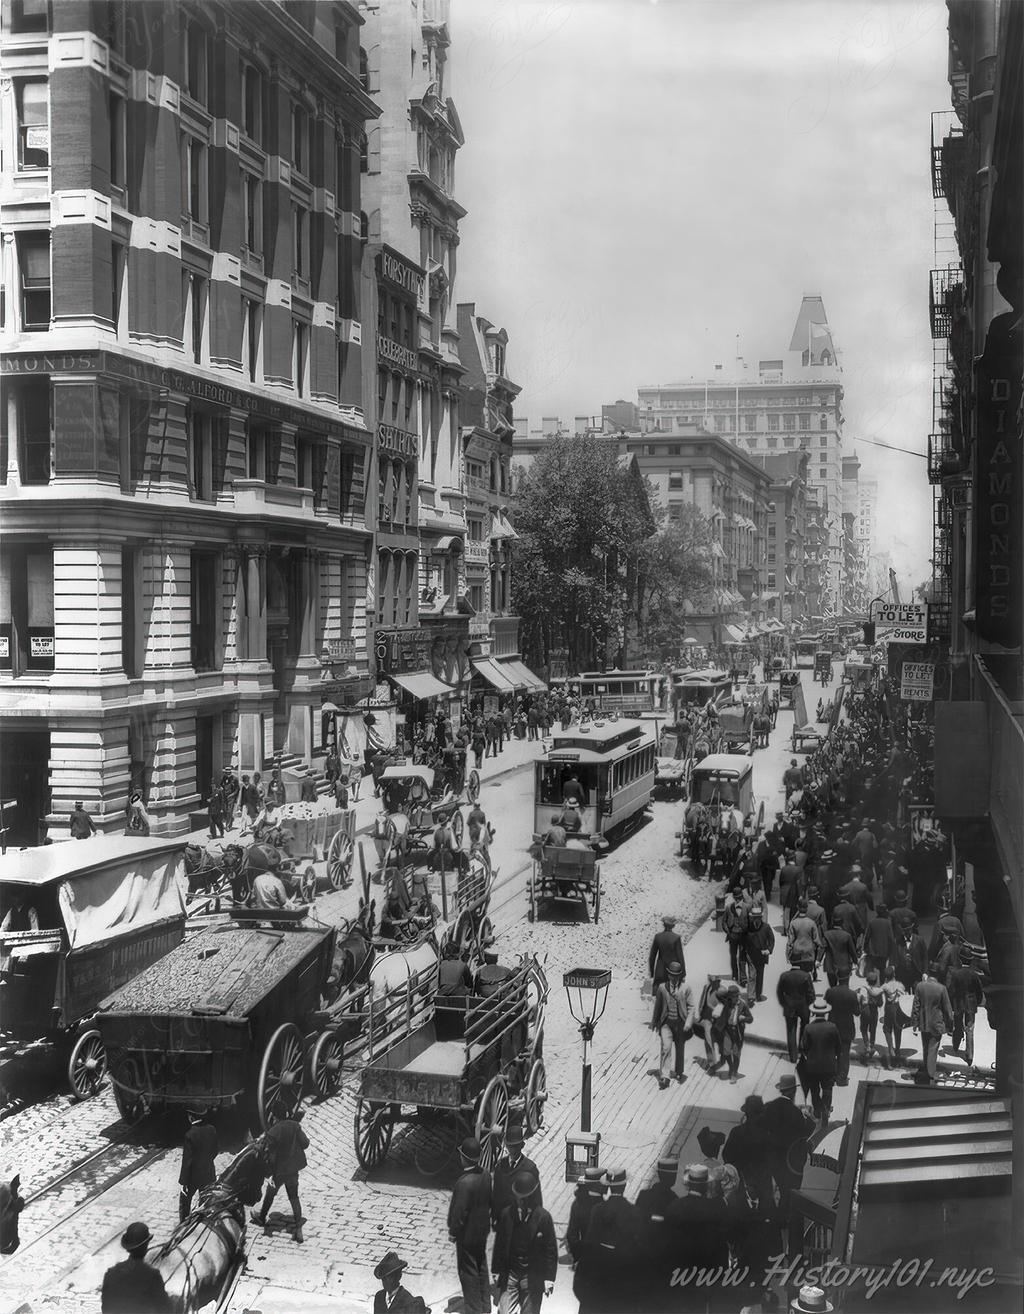 Photograph of Broadway near John Street filled with carriages and pedestrians.